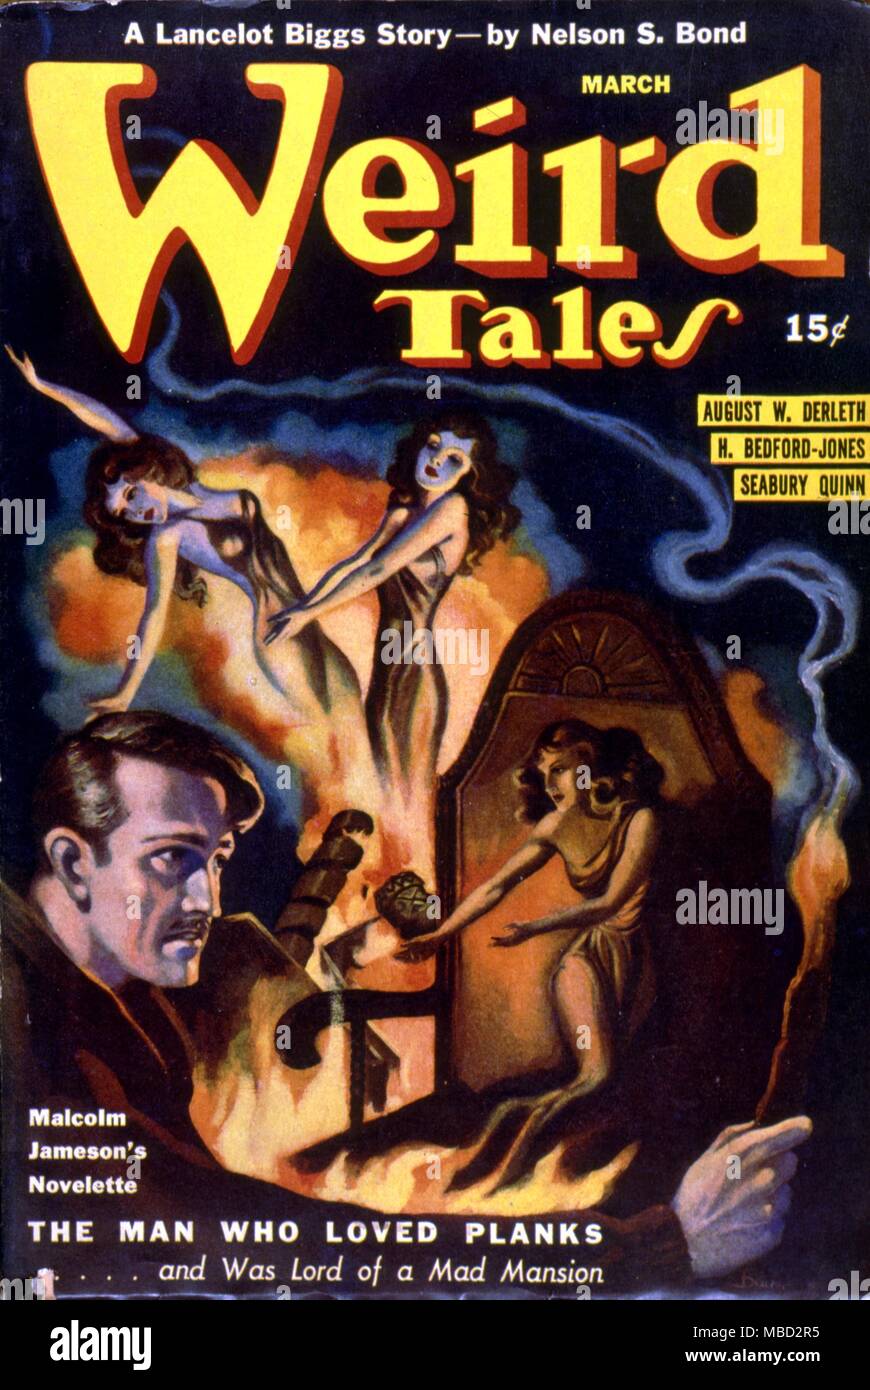 Science Fiction & Horror Magazine. Cover of Weird Tales. March 1941. Artwork by Brundage Stock Photo